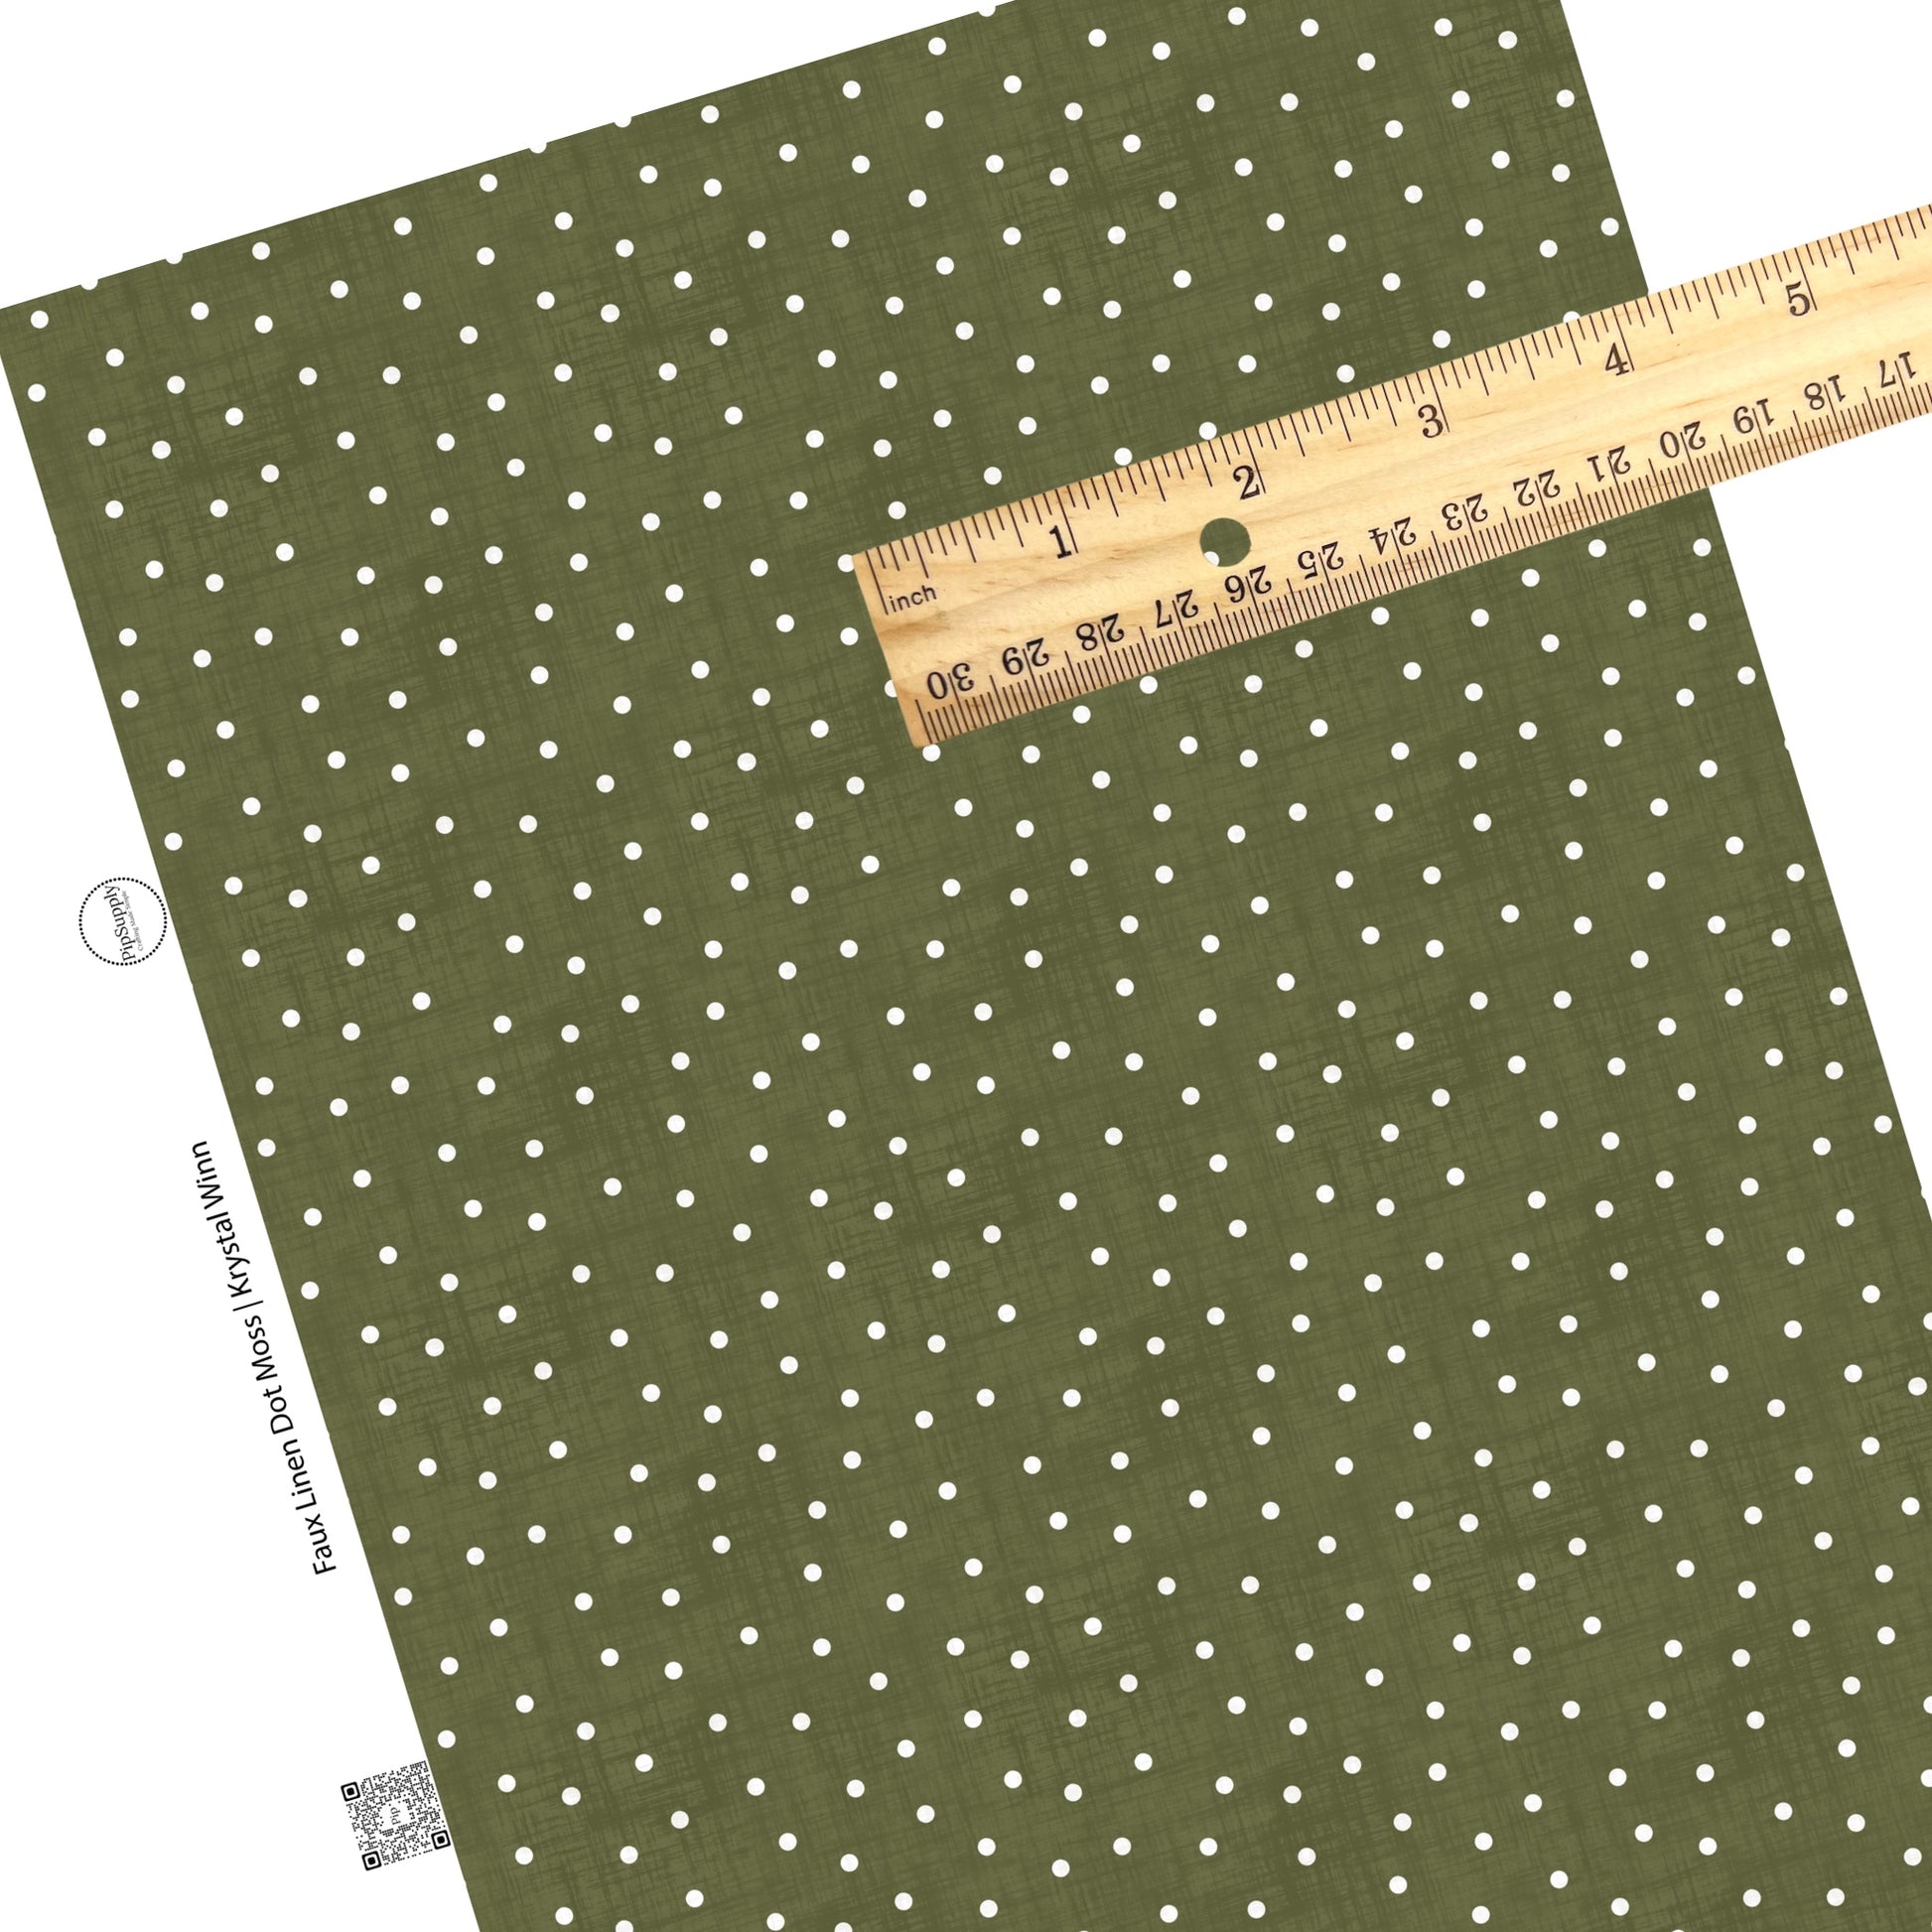 White dots on distressed green faux leather sheets